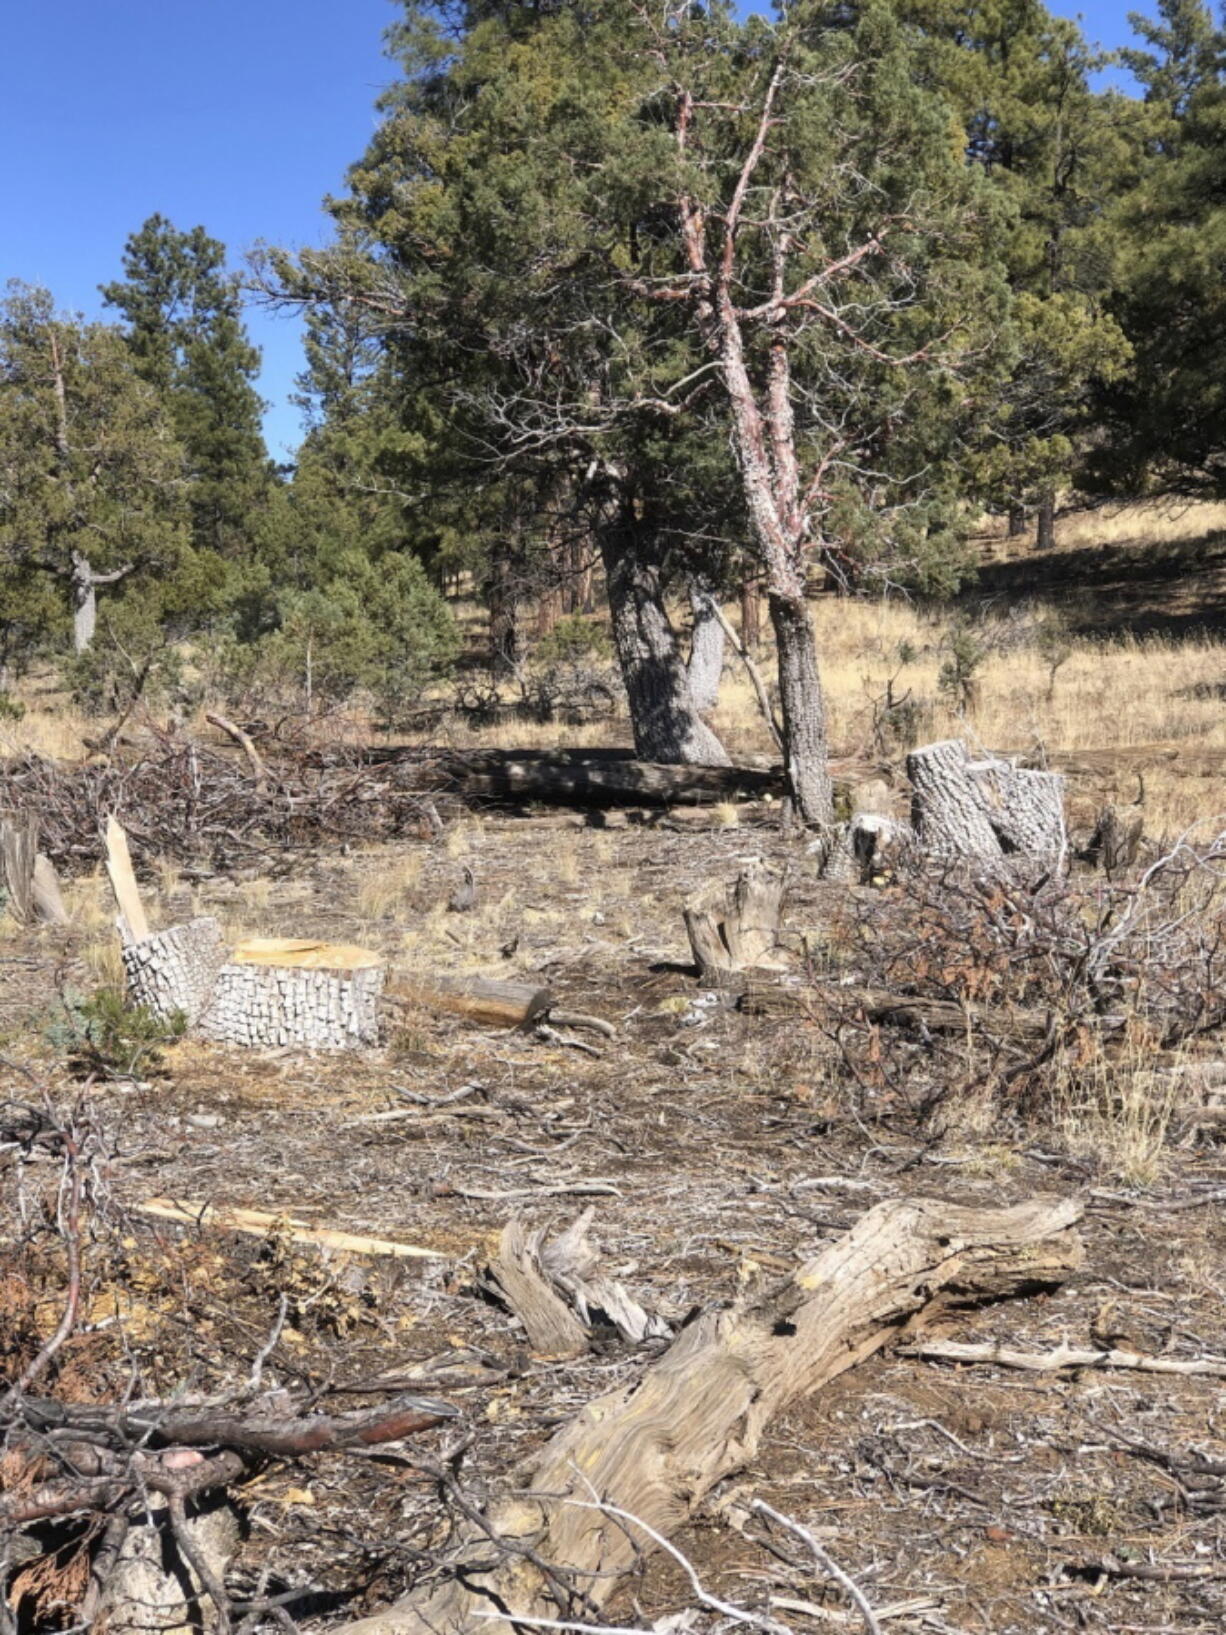 This undated image provided by the National Park Service shows the illegal harvest of alligator juniper trees at El Malpais National Monument near Grants, New Mexico. Park Service officials are asking the public for help to stop the illegal harvesting of the trees, which are considered rare due to their slow growth rate.